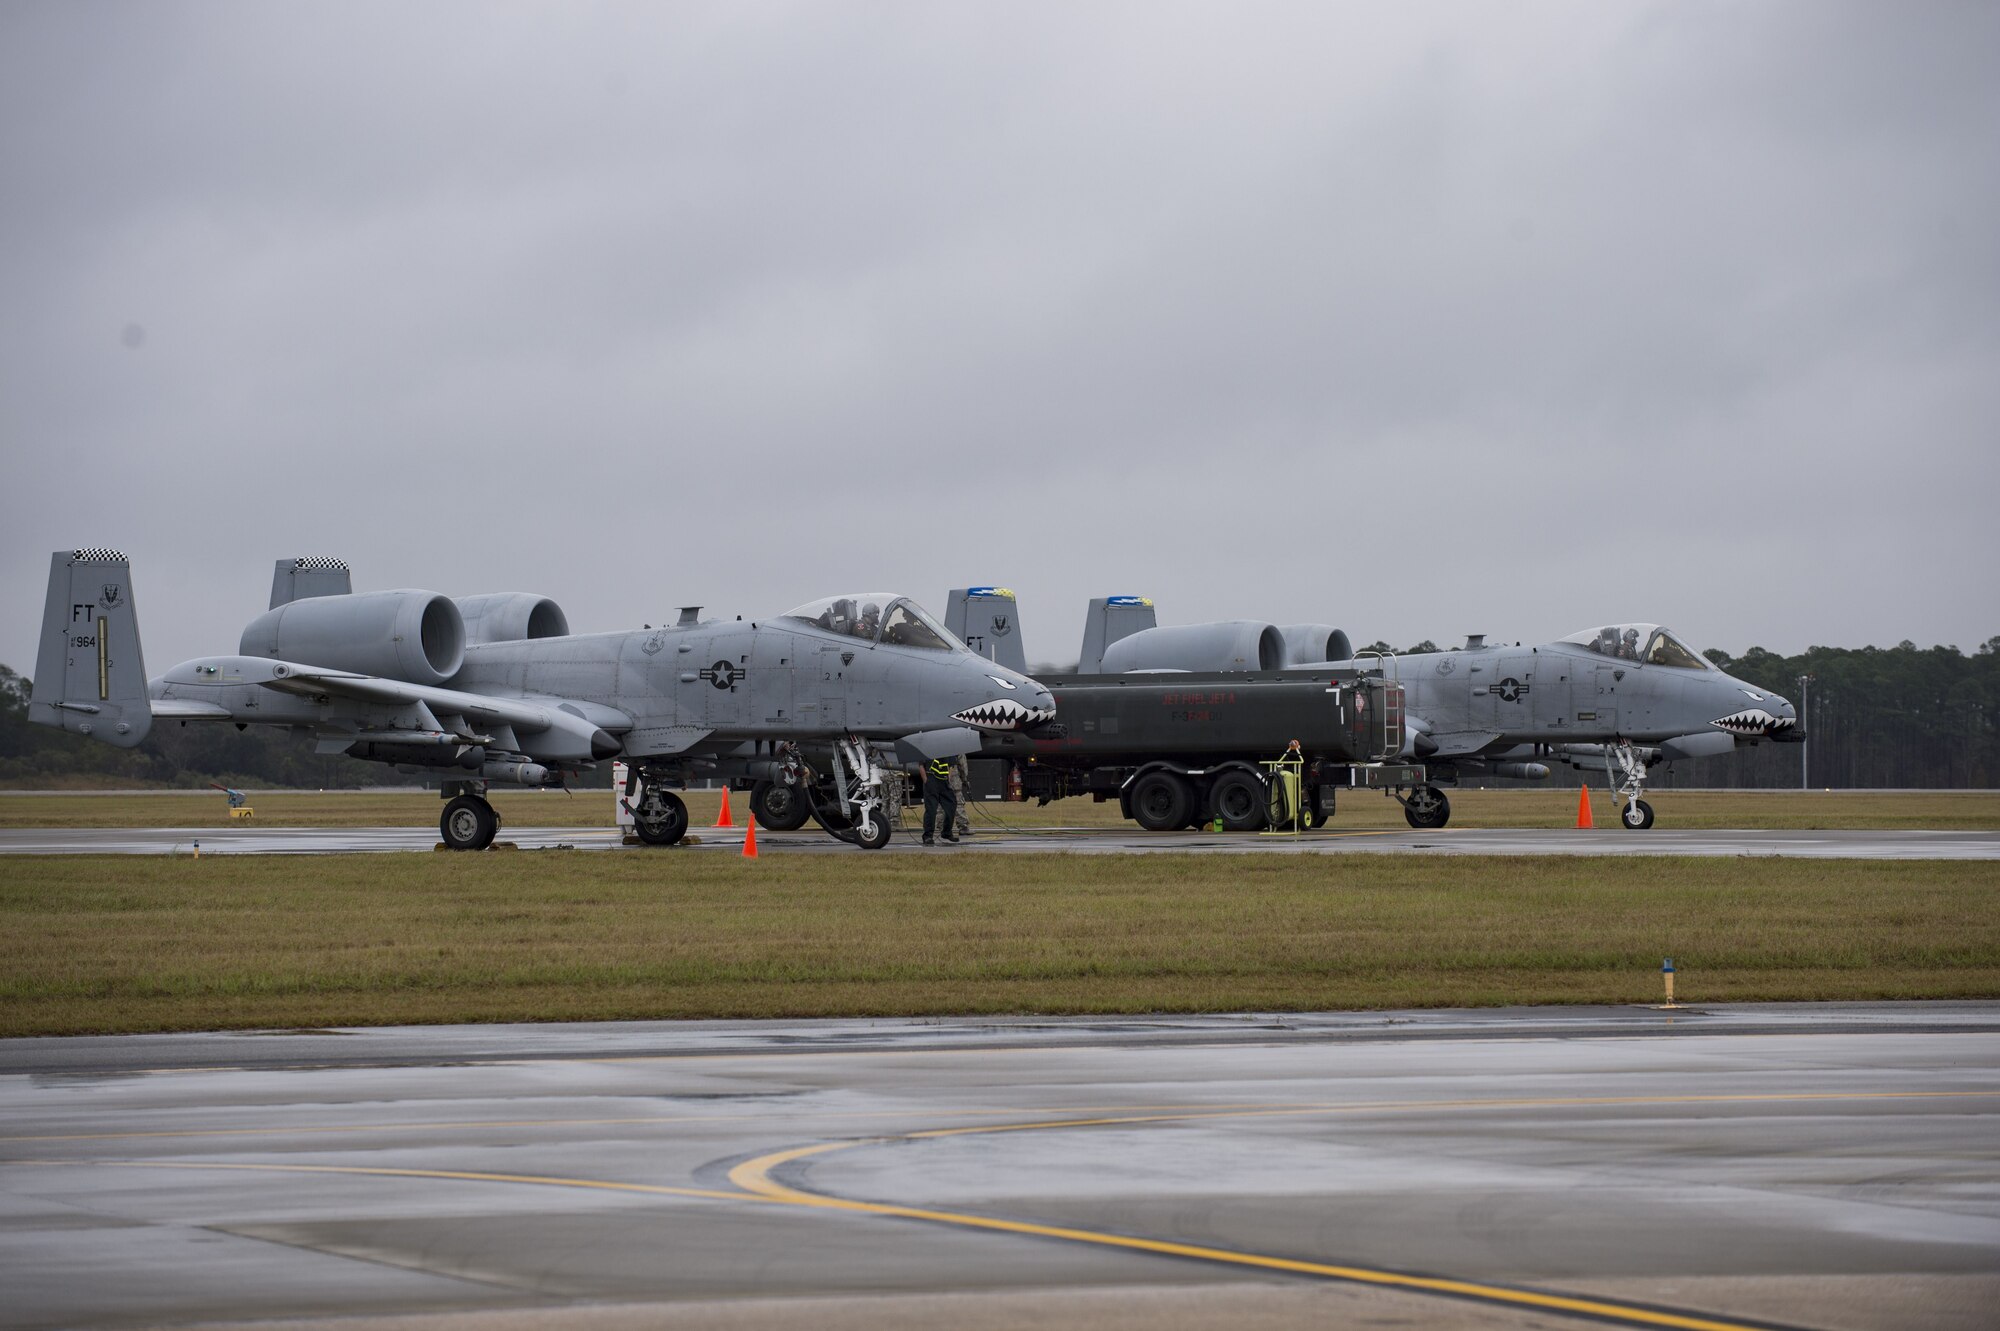 Airmen from the 23d Logistics Readiness Squadron preform a hot pit refuel on A-10C Thunderbolt IIs, Dec. 7, 2017, at Moody Air Force Base, Ga. Moody recently participated in a week-long, Phase 1, Phase 2 exercise designed to demonstrate the 23d Wing’s ability to meet combatant commander objectives. The exercise tested LRS Airmen on hot pit refueling, a procedure usually performed in a combat situation to rapidly refuel aircraft. 
 (U.S. Air Force photo by Andrea Jenkins)